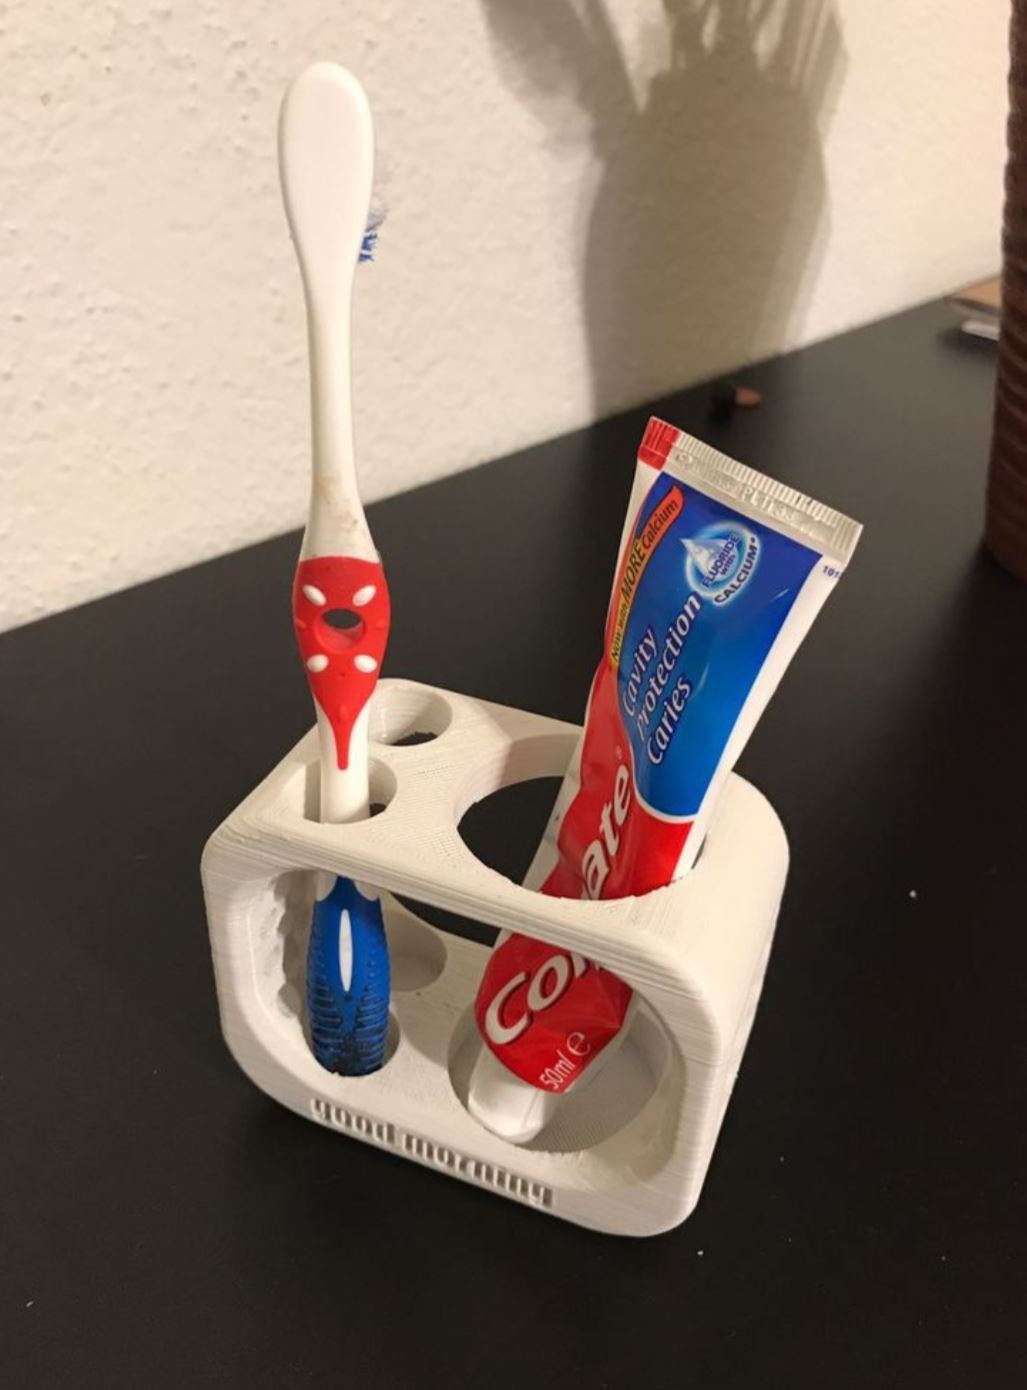 Toothbrush and Toothpaste Holder for Two Toothbrushes